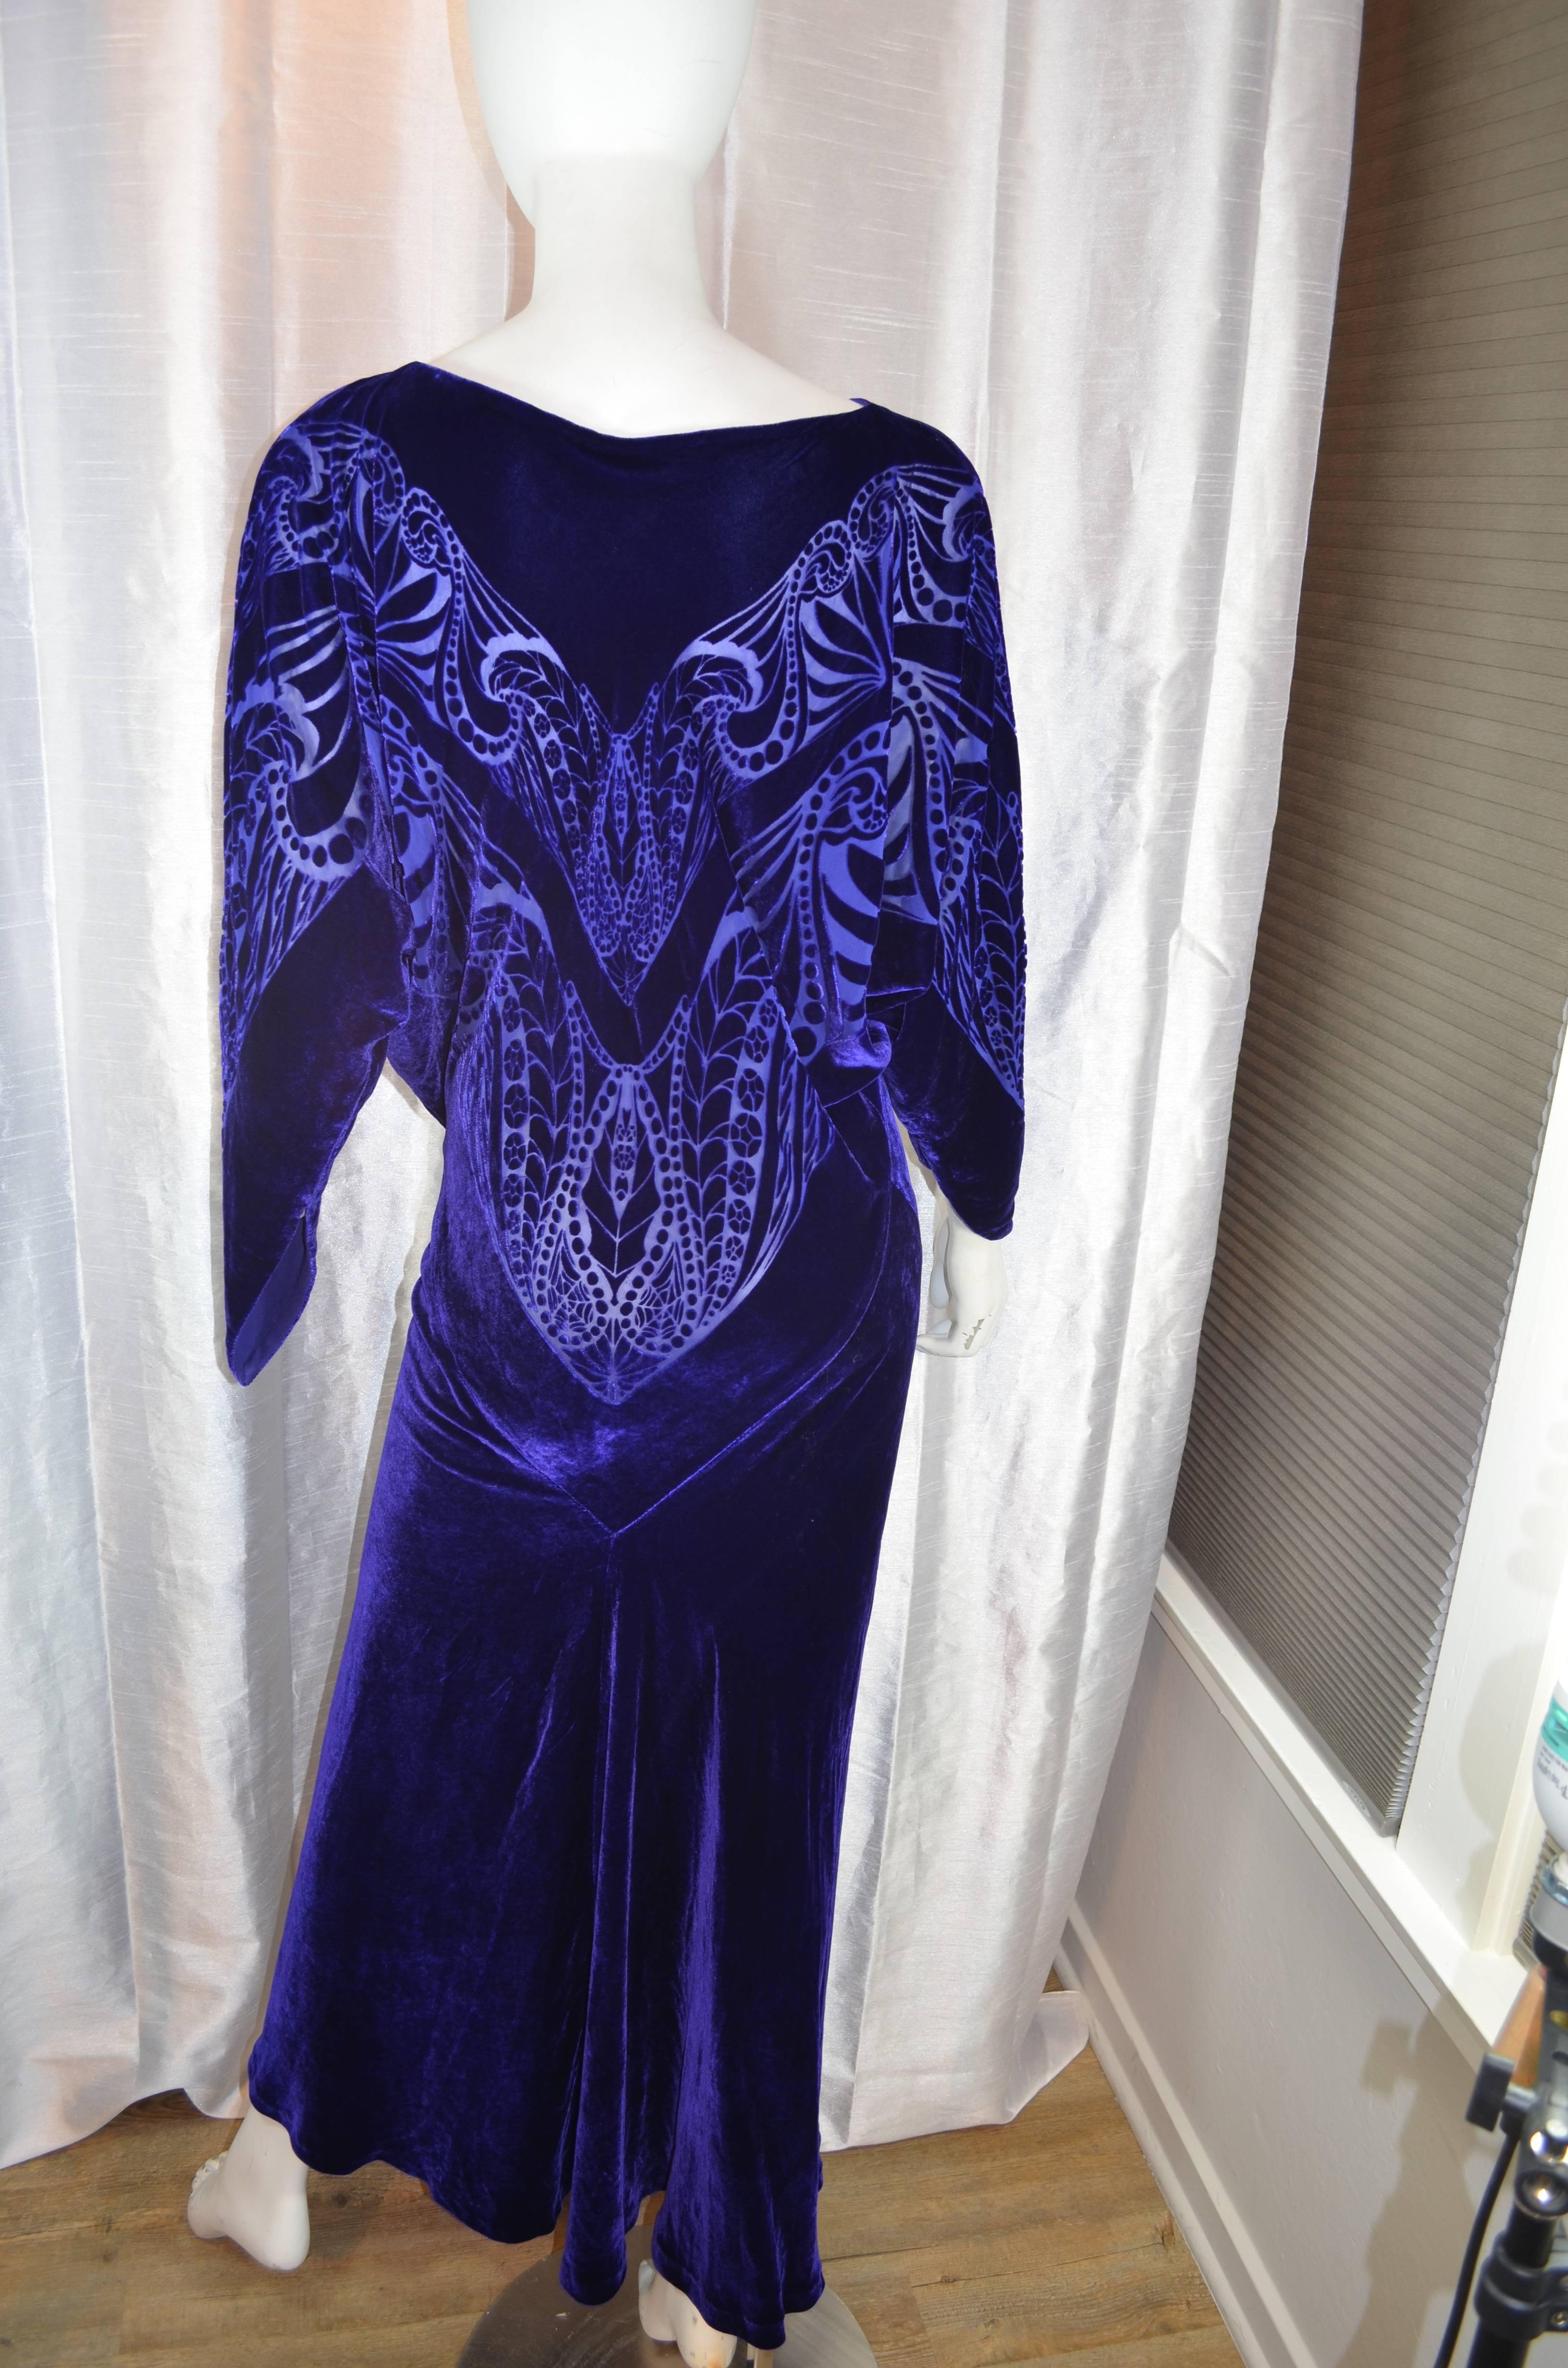 Charles and Patricia Lester Couture Gown

Purple burnout silk velvet bias cut gown. Excellent condition.

Measurements in inches: Note: 2+/- inches give due to bias cut and larger the size shorter the gown
Bust - 34-40
Waist - 24-28
Hip -